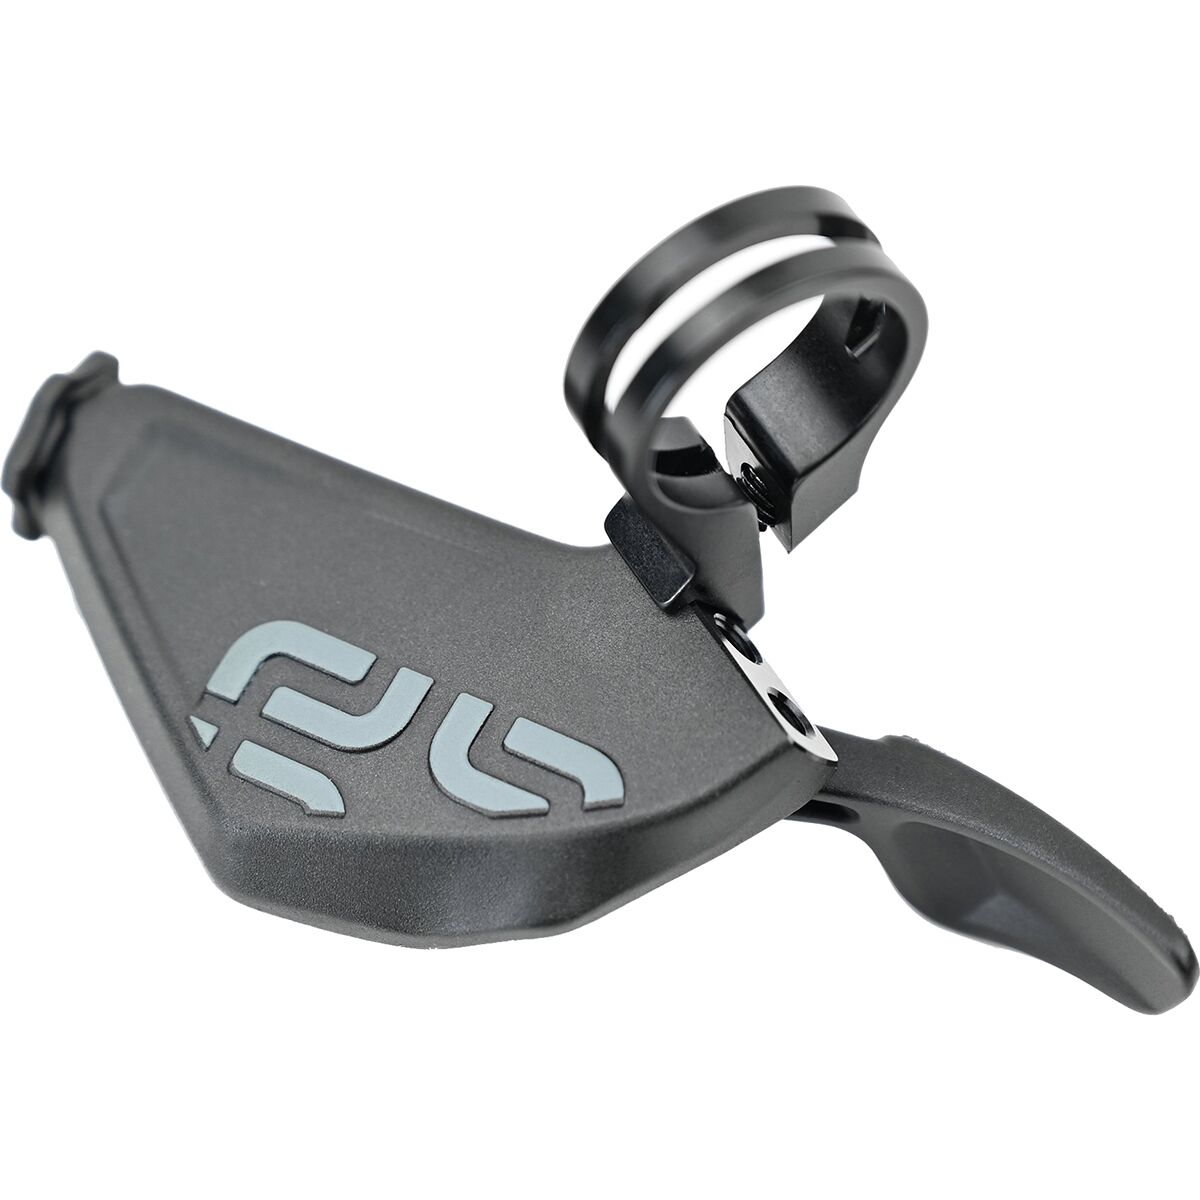 e*thirteen components Vario 1x Dropper Lever Stealth Black, MatchMaker, Cable & Housing Included